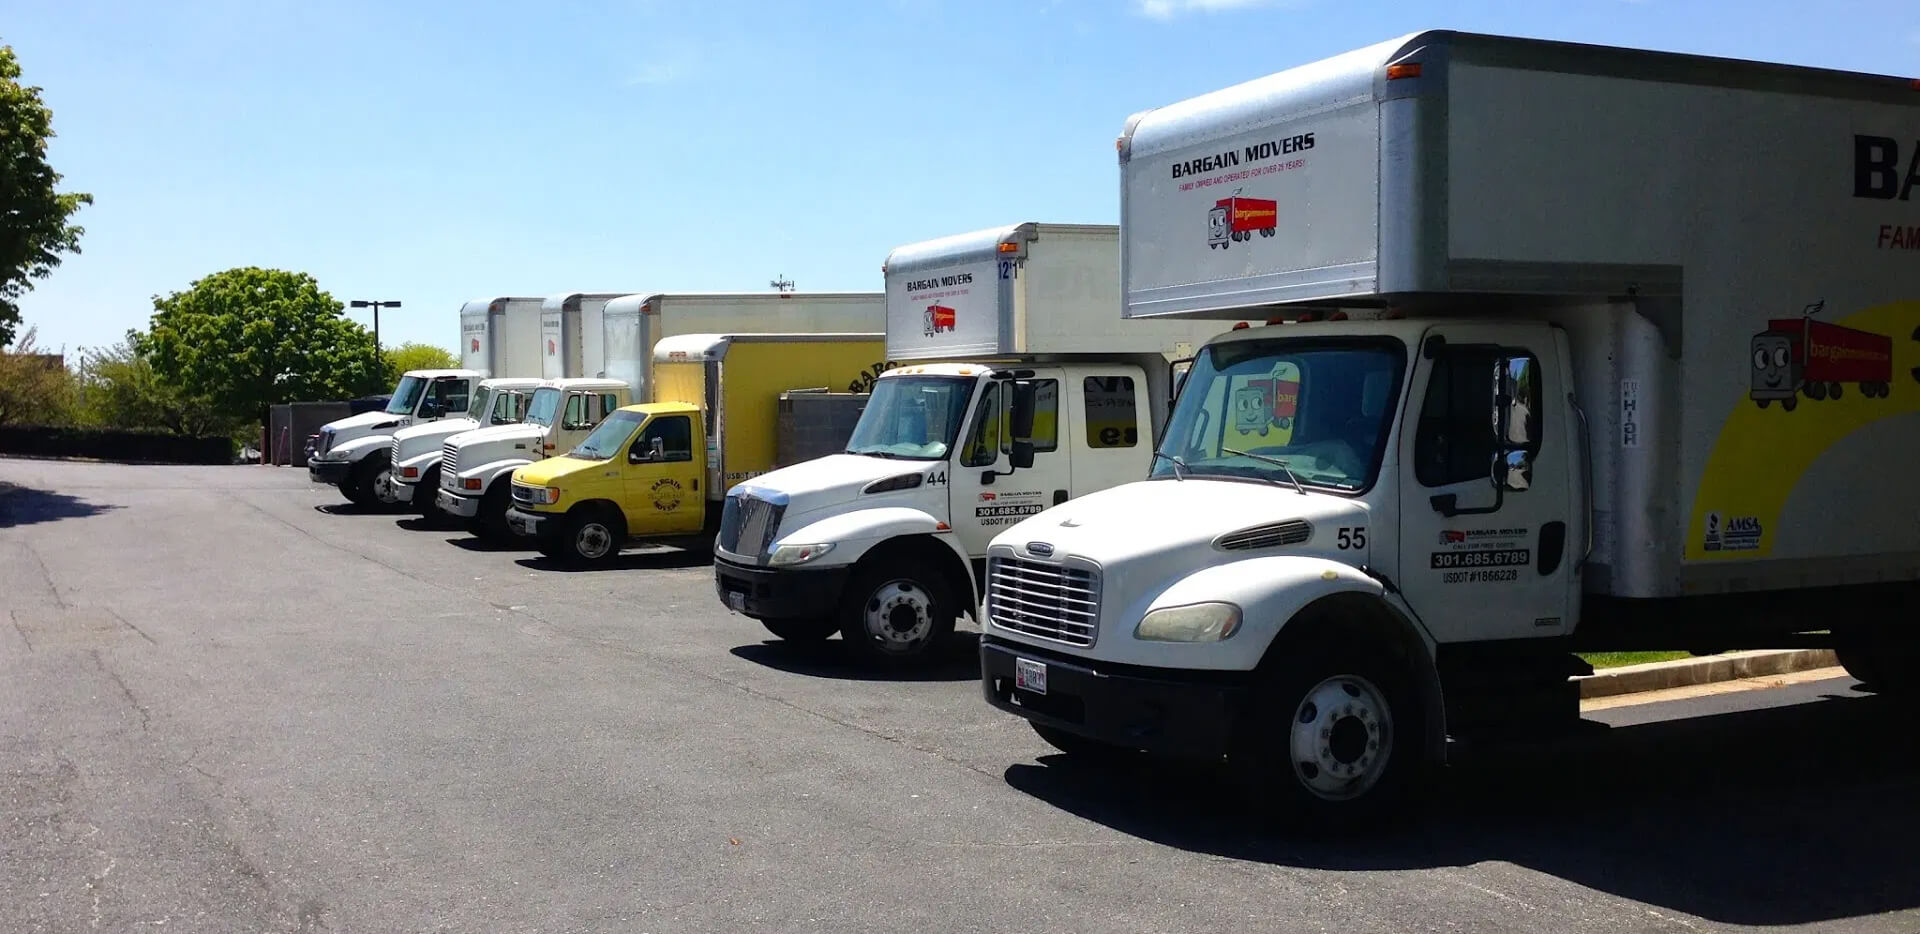 Trusted Maryland Movers - All My Sons Moving & Storage